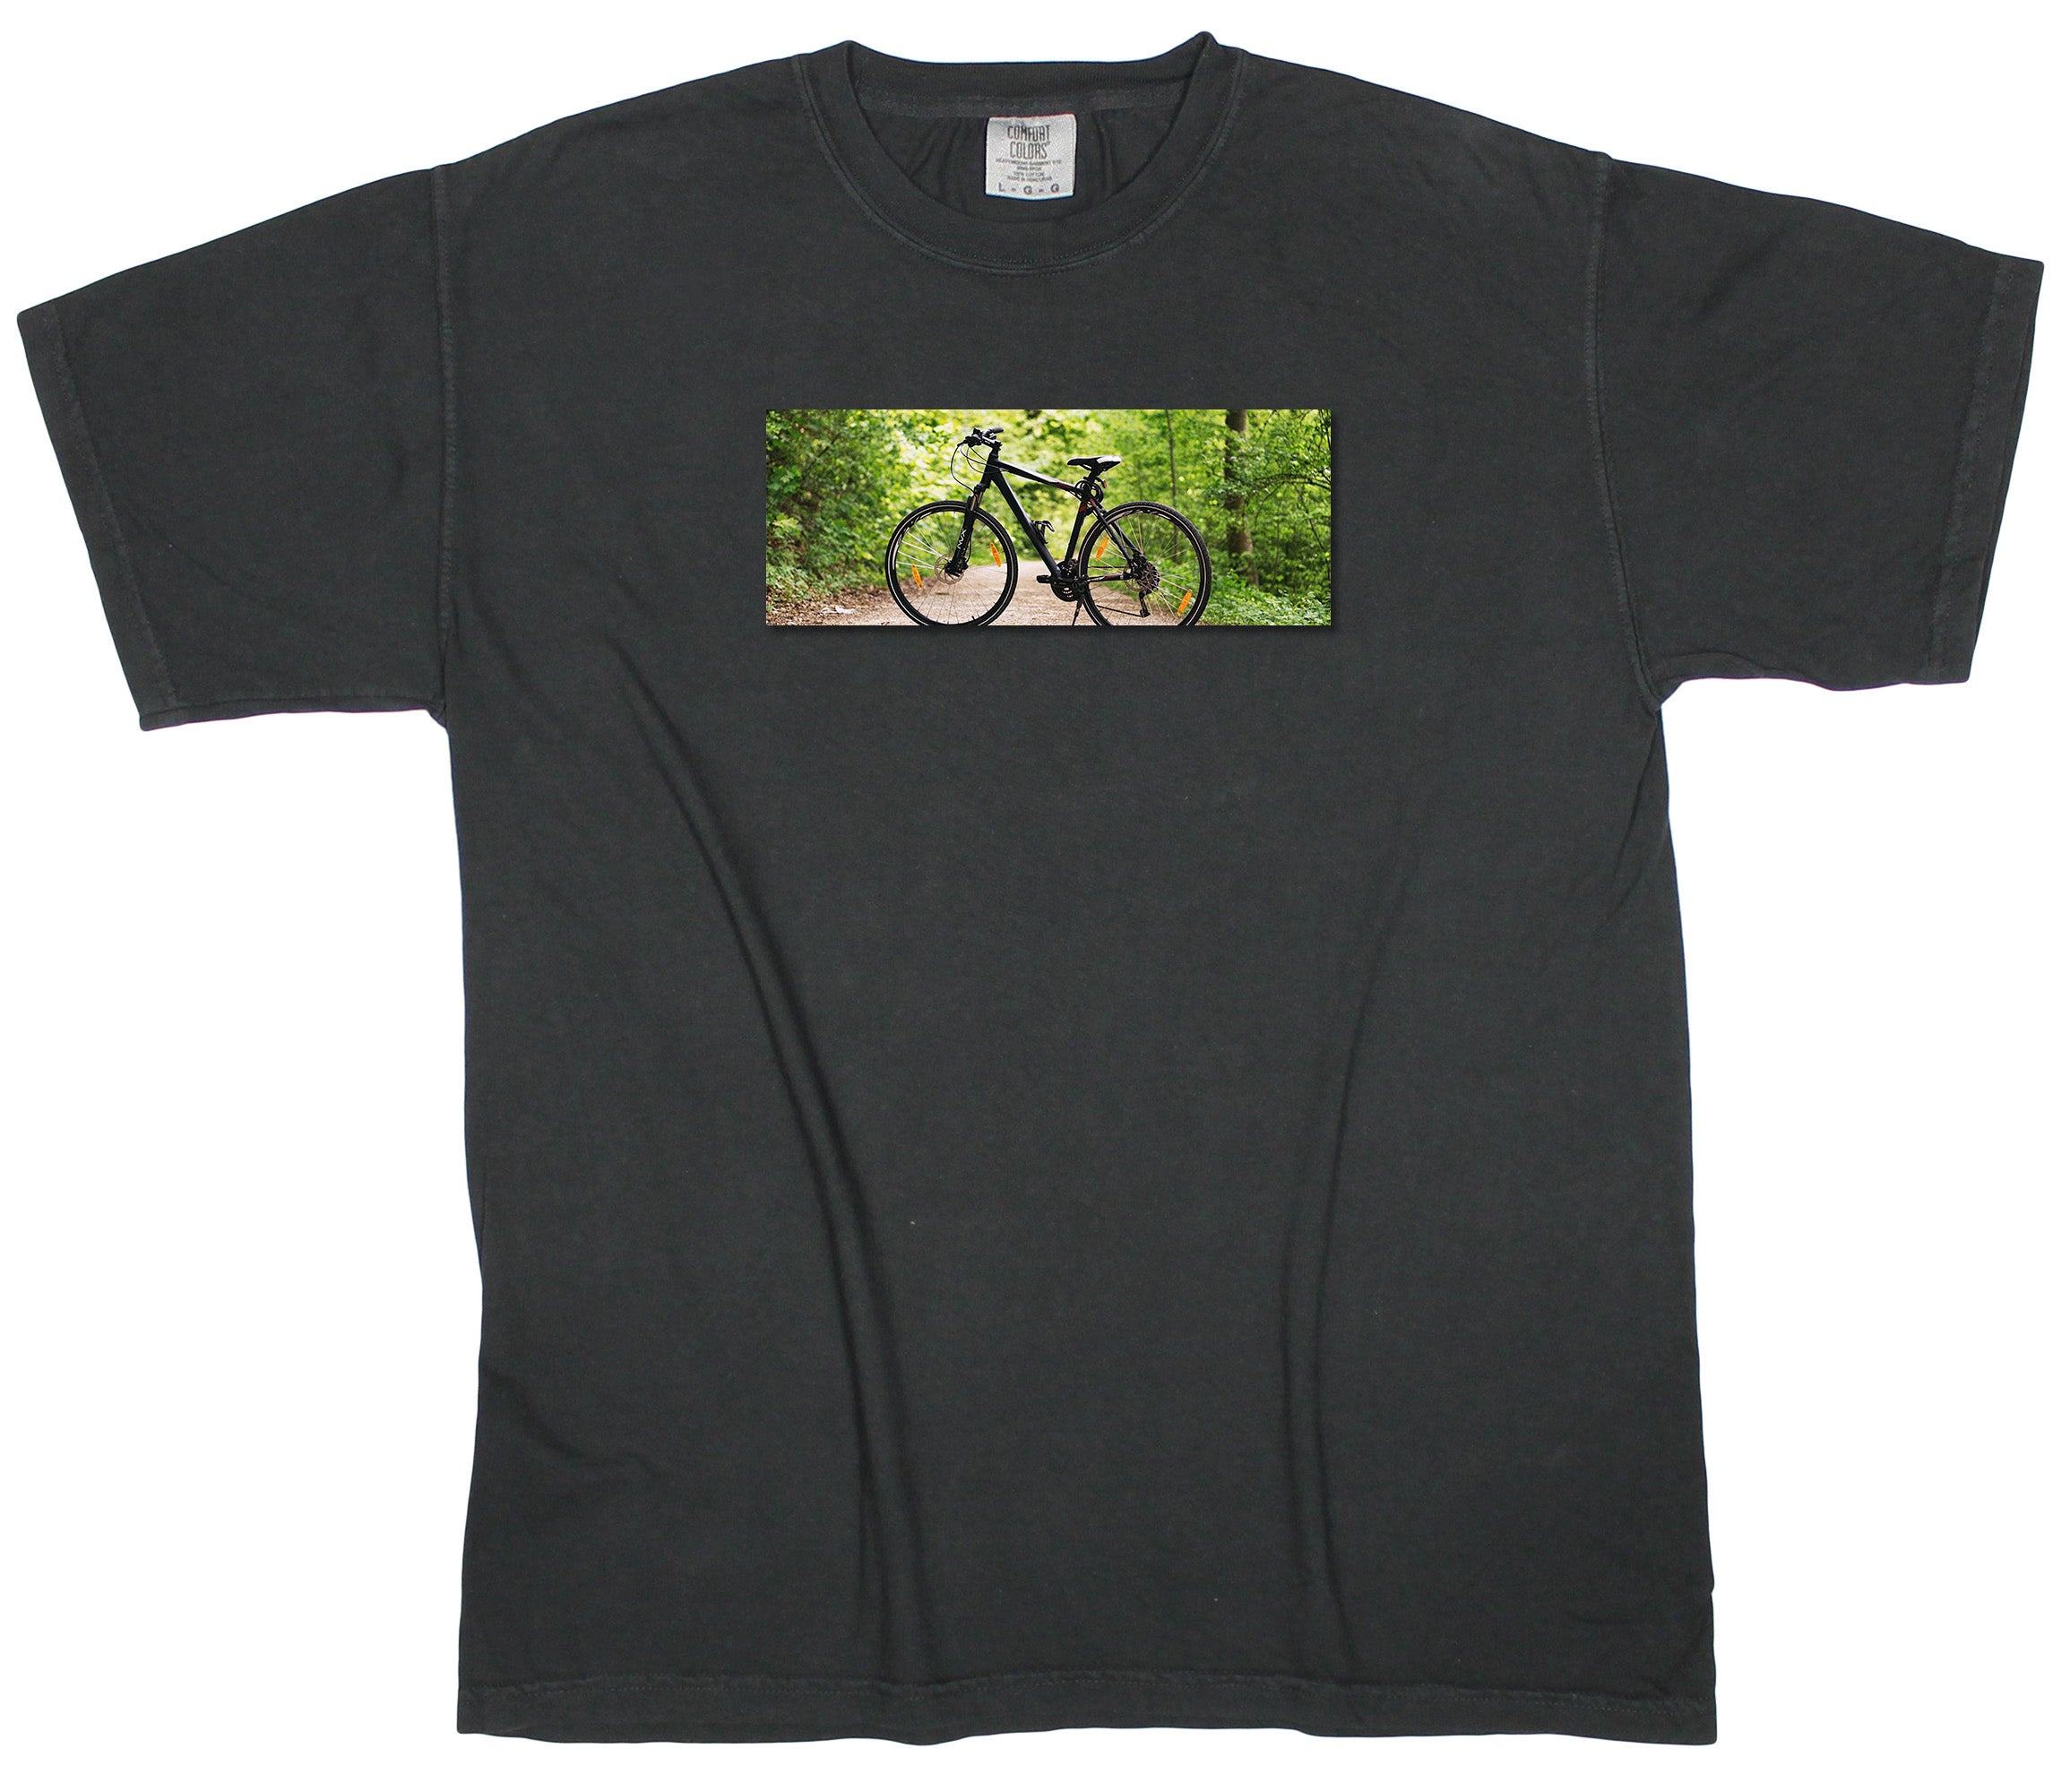 Lakes and Forests: Bike Trail Patch T-shirt